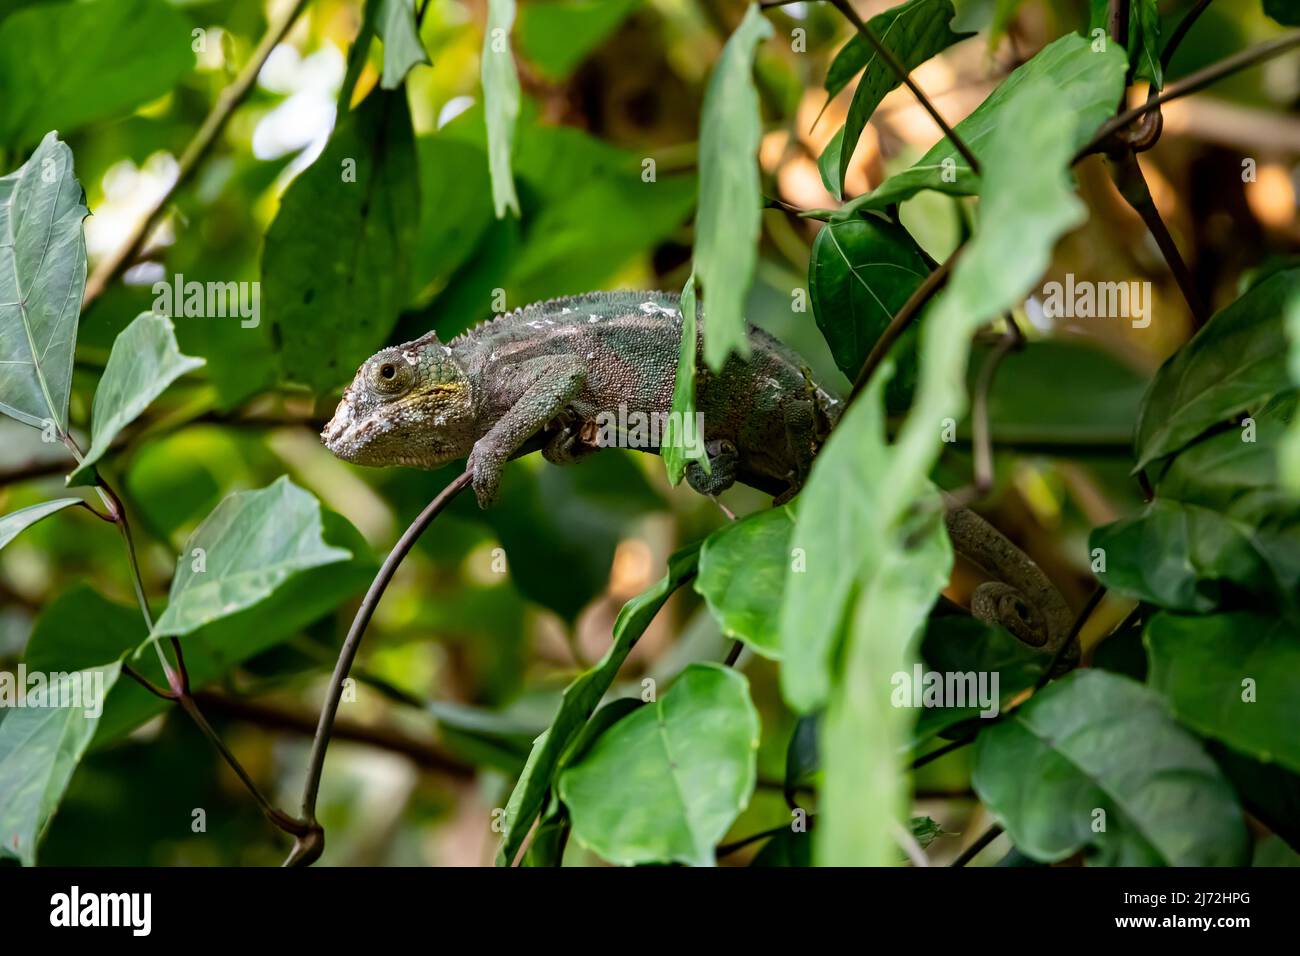 A  chameleon in disguise colors at Zoo Zurich, Switzerland Stock Photo